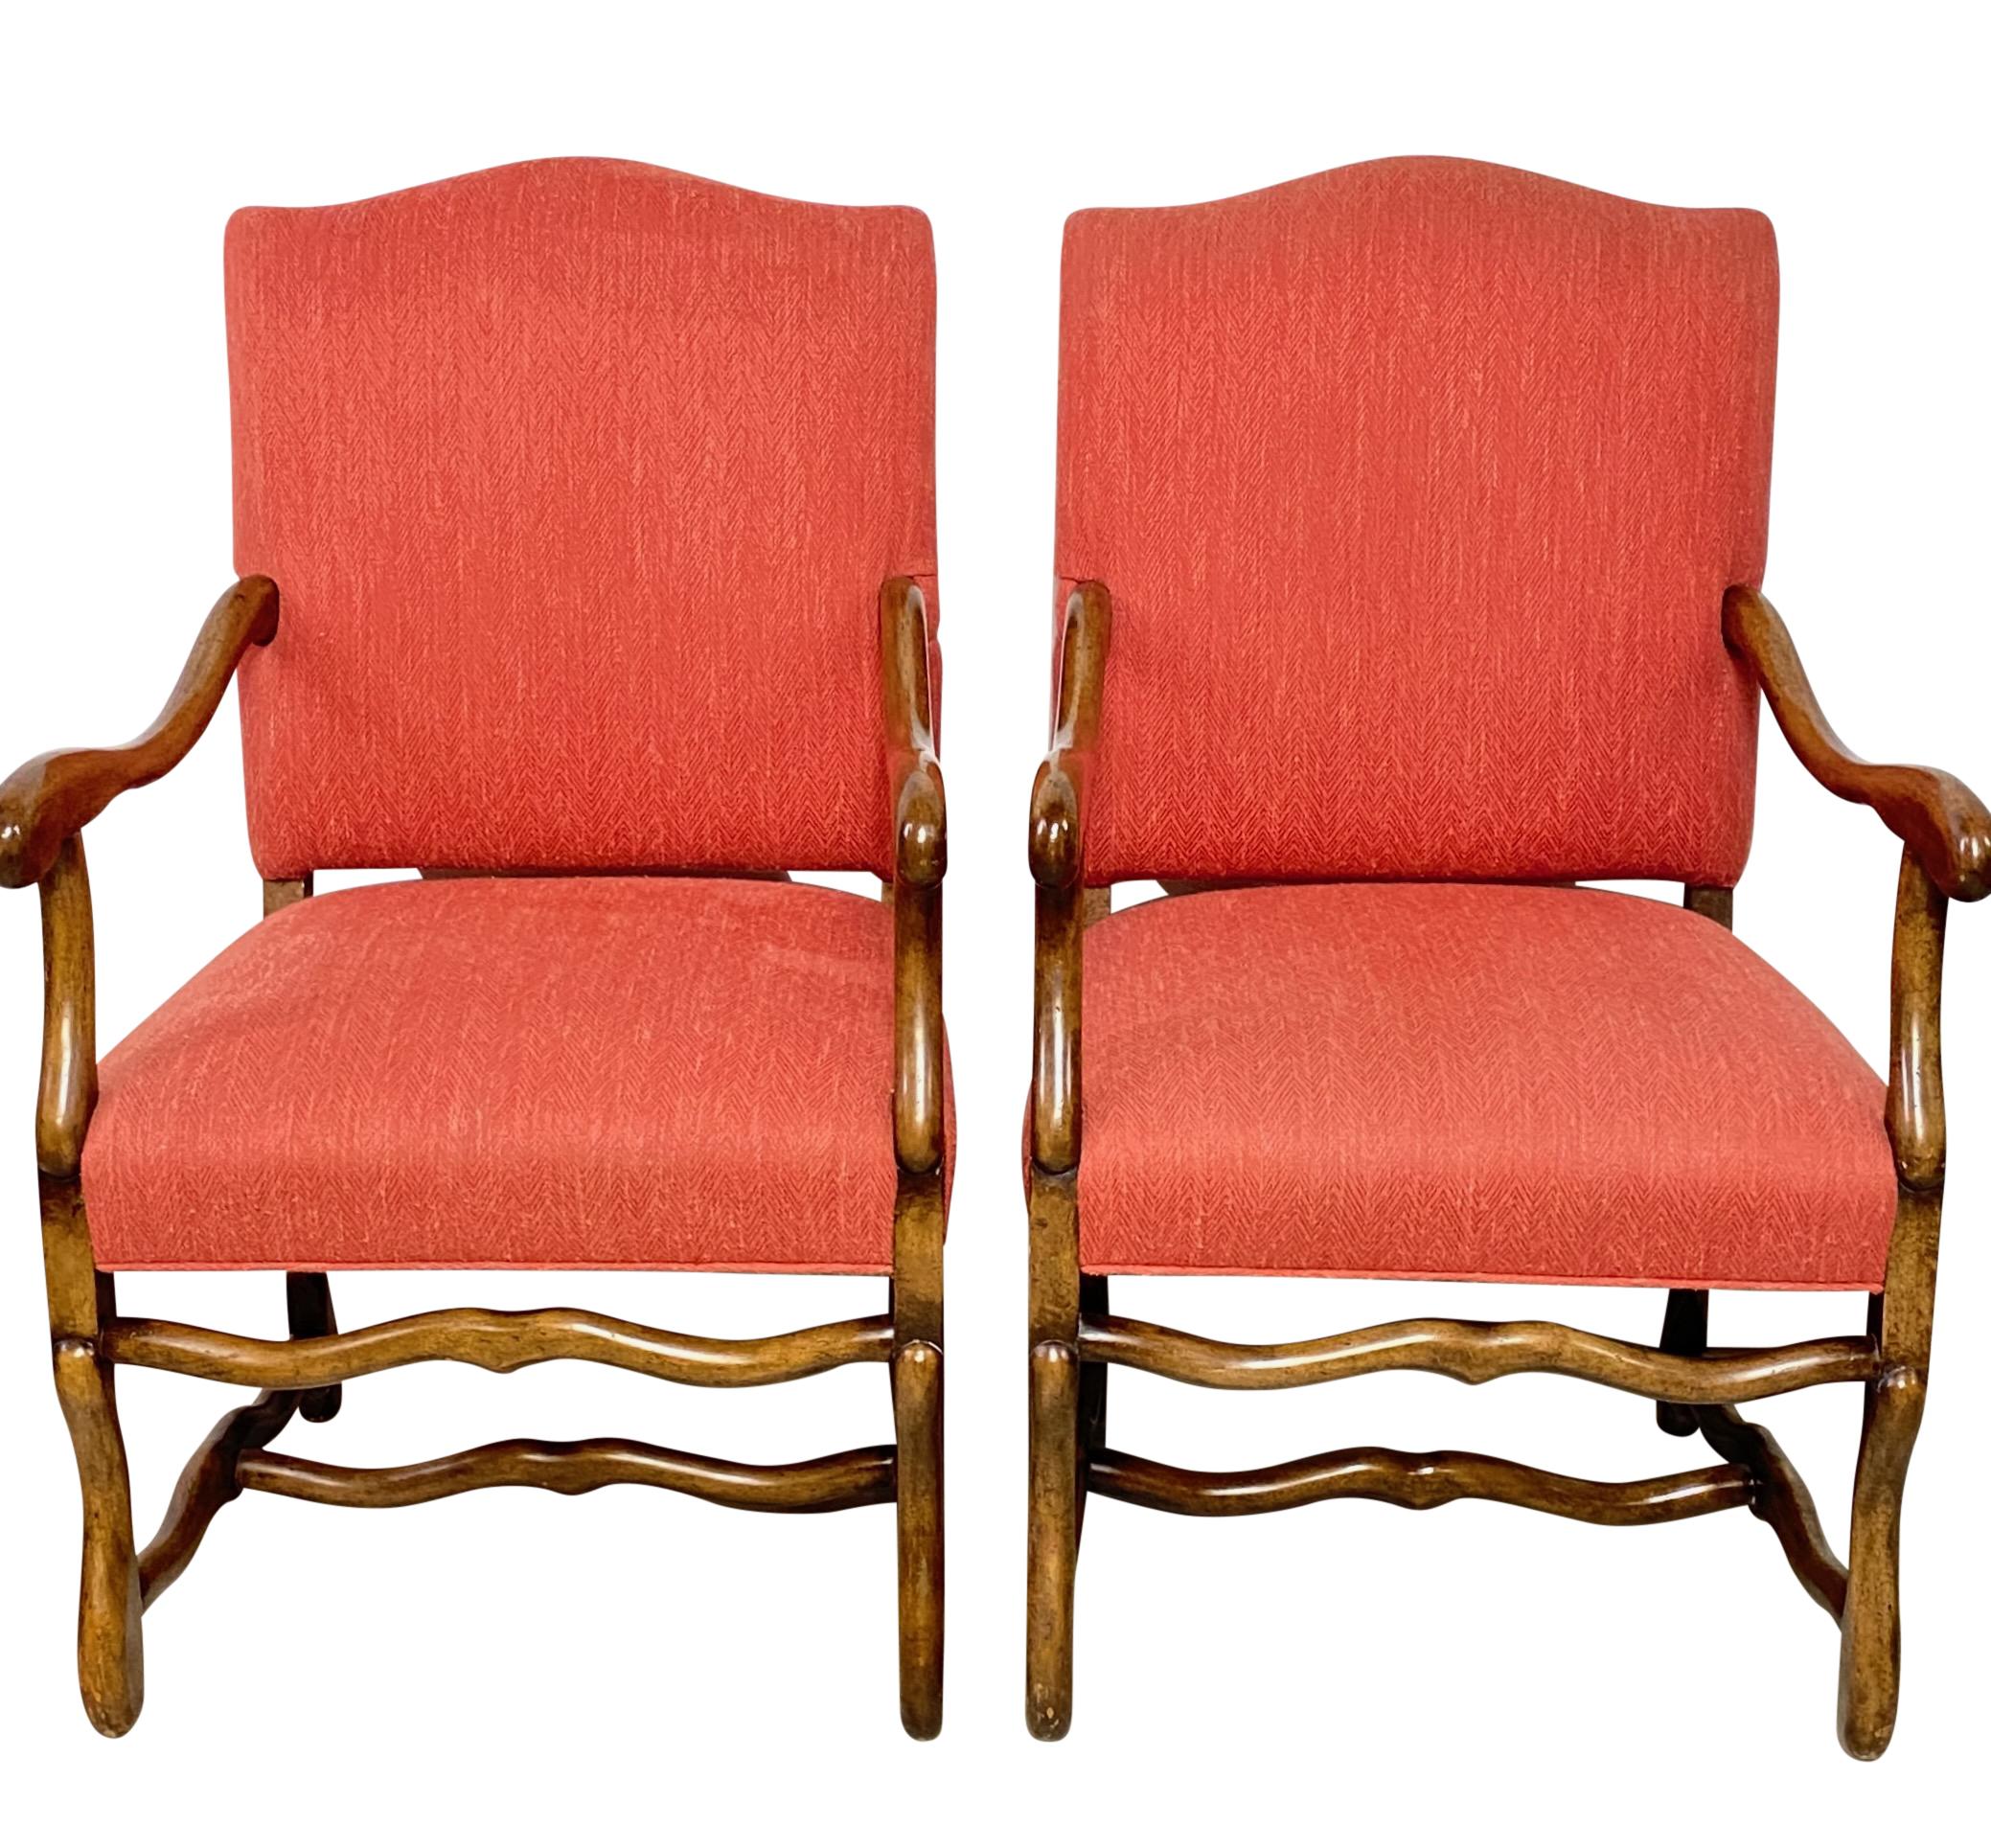 20th Century Pair of 18th Century Style French Walnut Armchairs For Sale